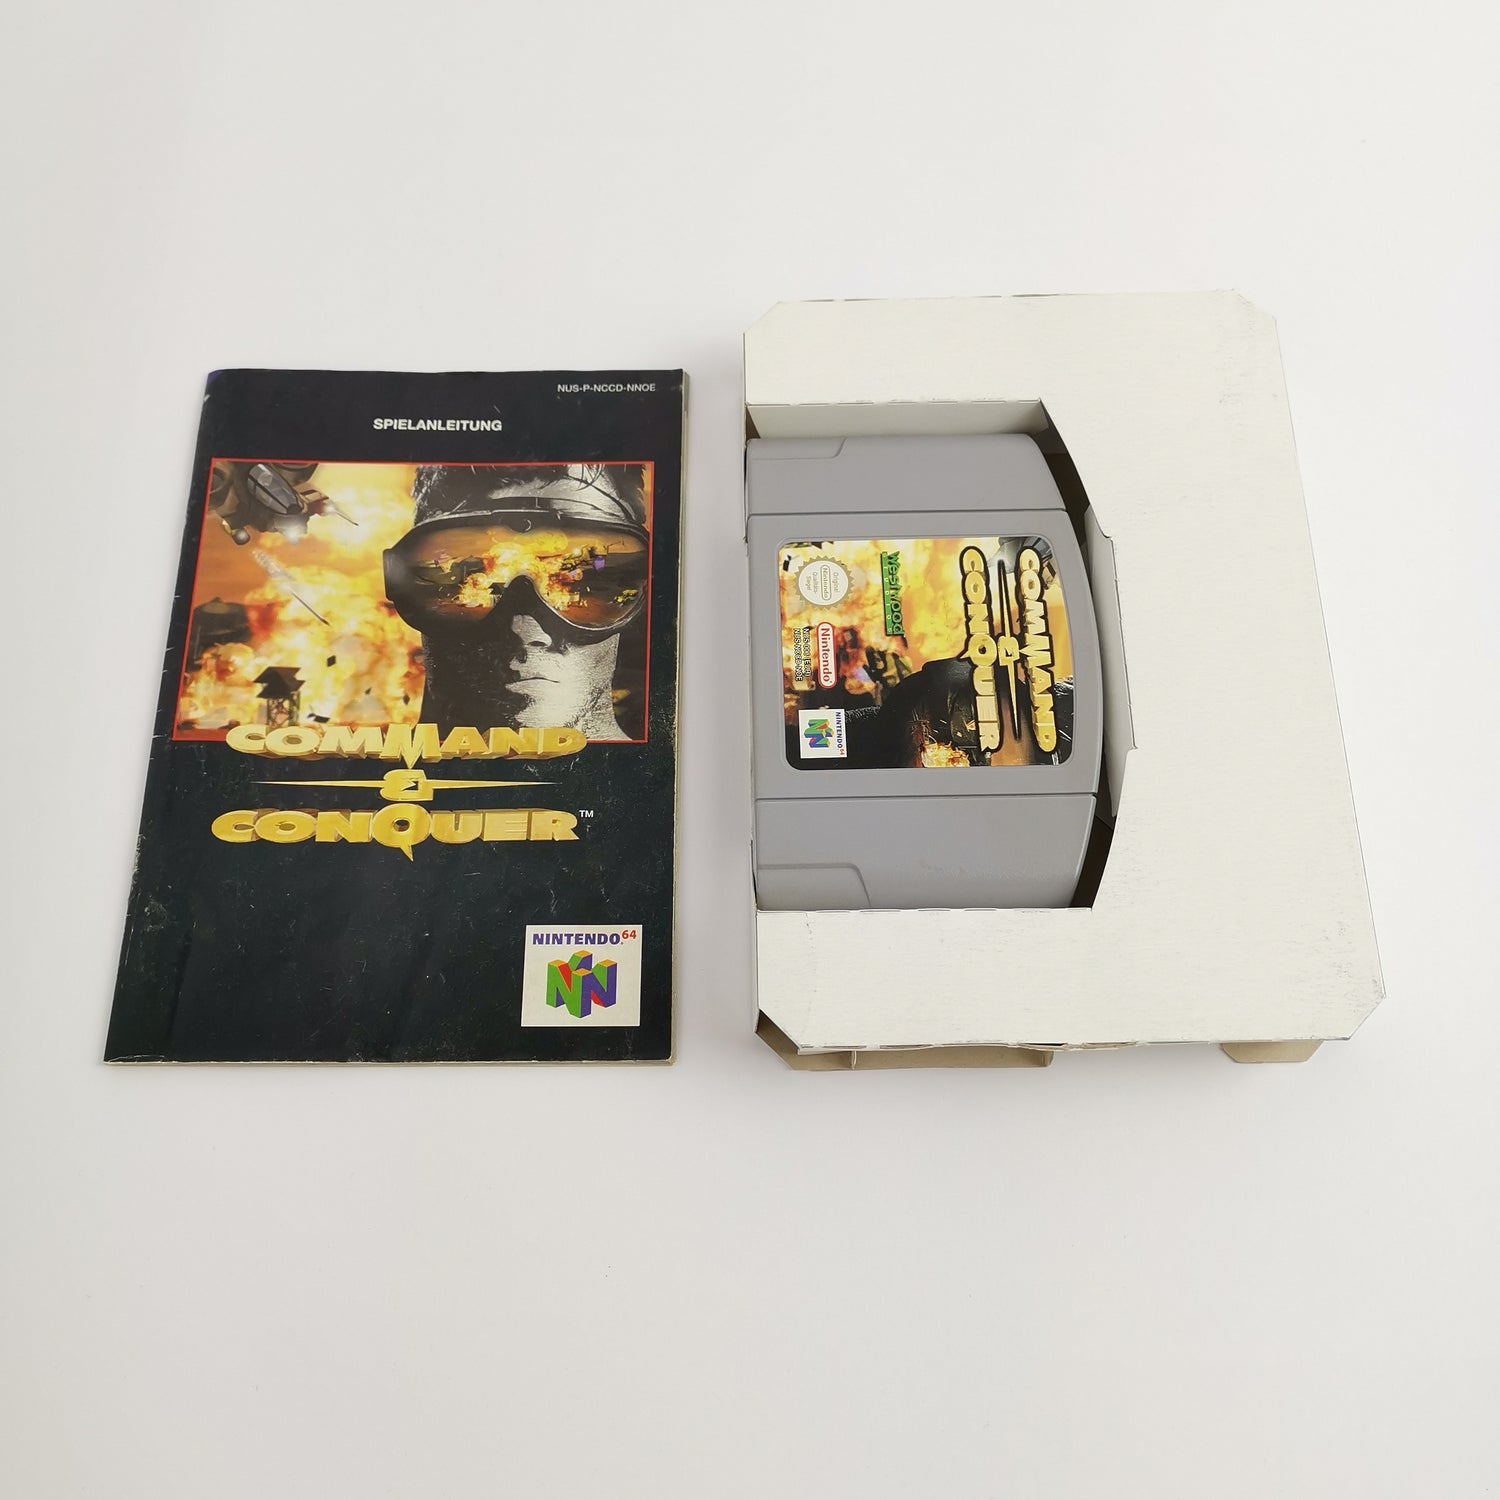 Nintendo 64 Game: Command & Conquer | N64 Game - OVP PAL